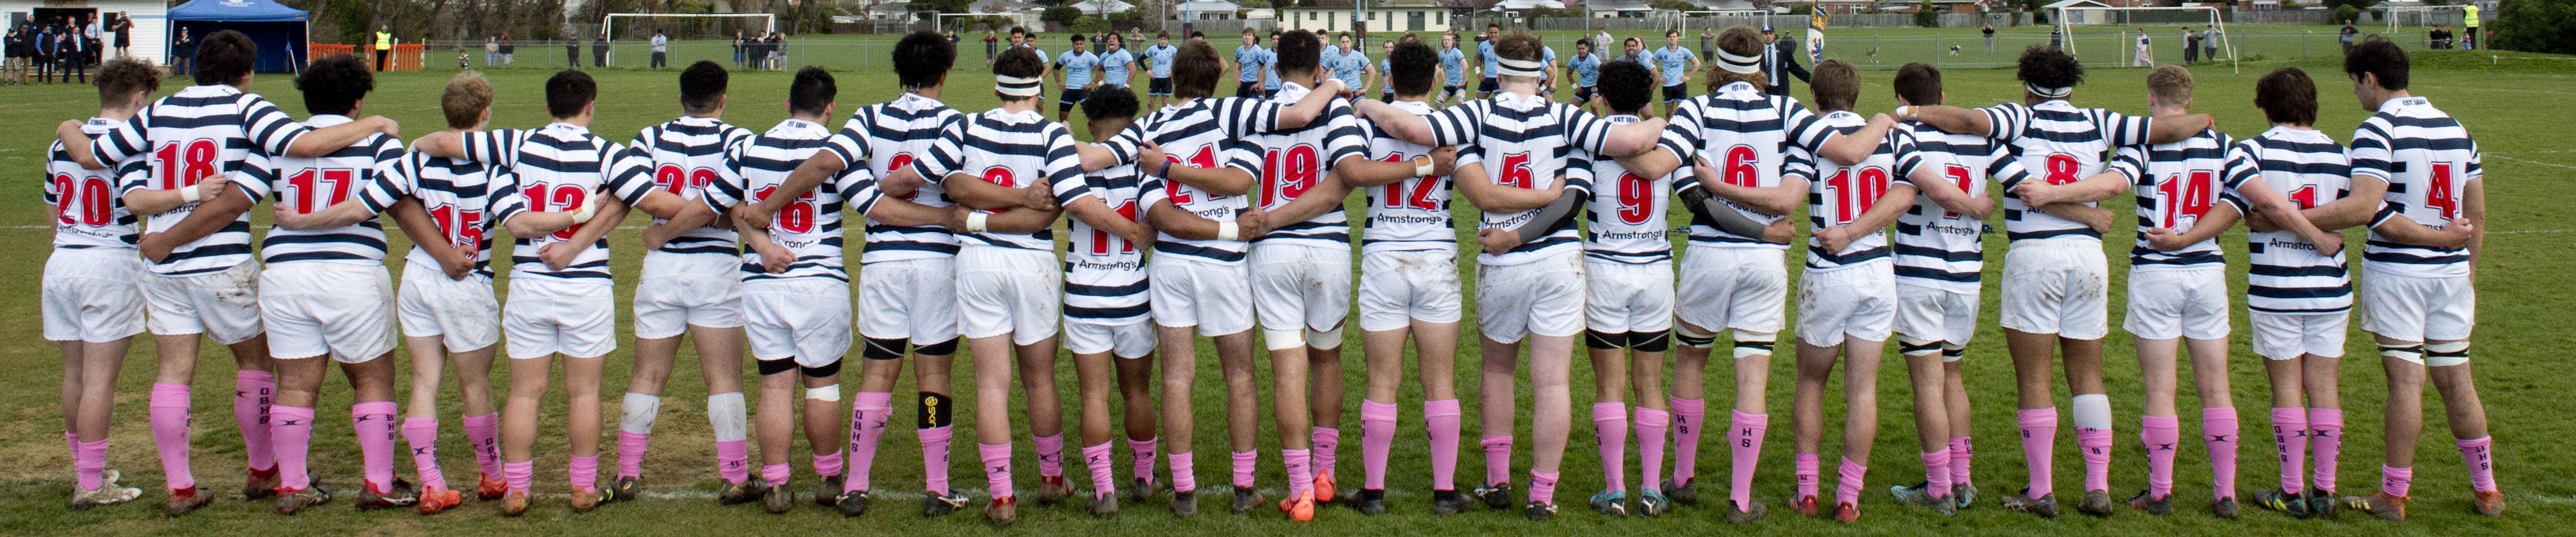 Wearing pink socks in a show of solidarity against homophobic bullying, the Otago Boys High School first XV face off the Kings High School haka before their interschool rugby match. Photo: Gerard O'Brien